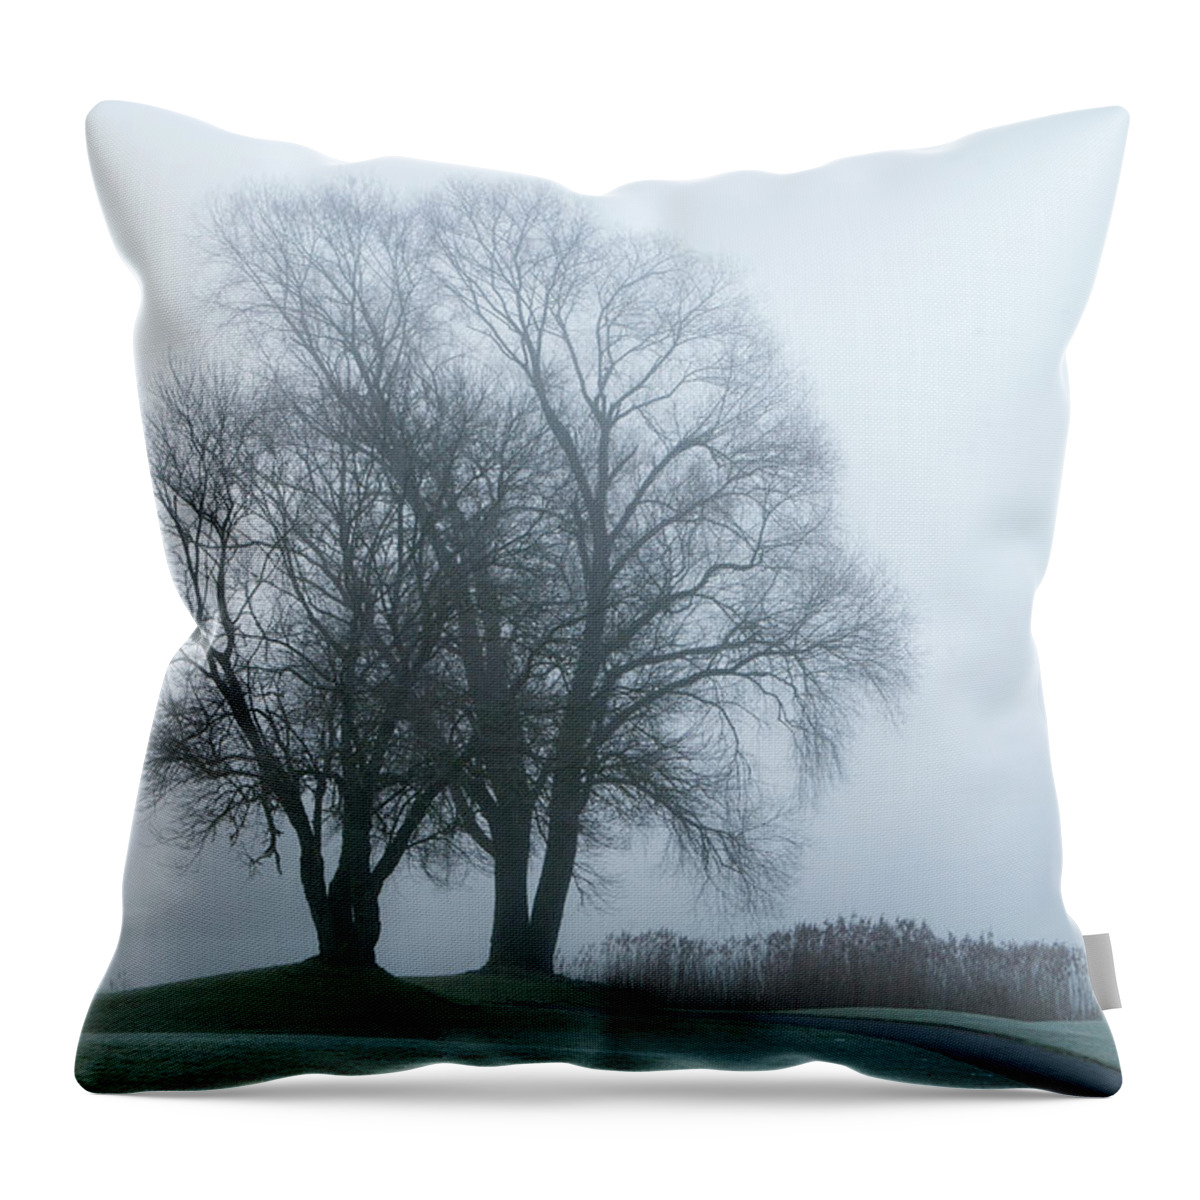 Tranquility Throw Pillow featuring the photograph Austria, View Of Trees With Reed In by Westend61